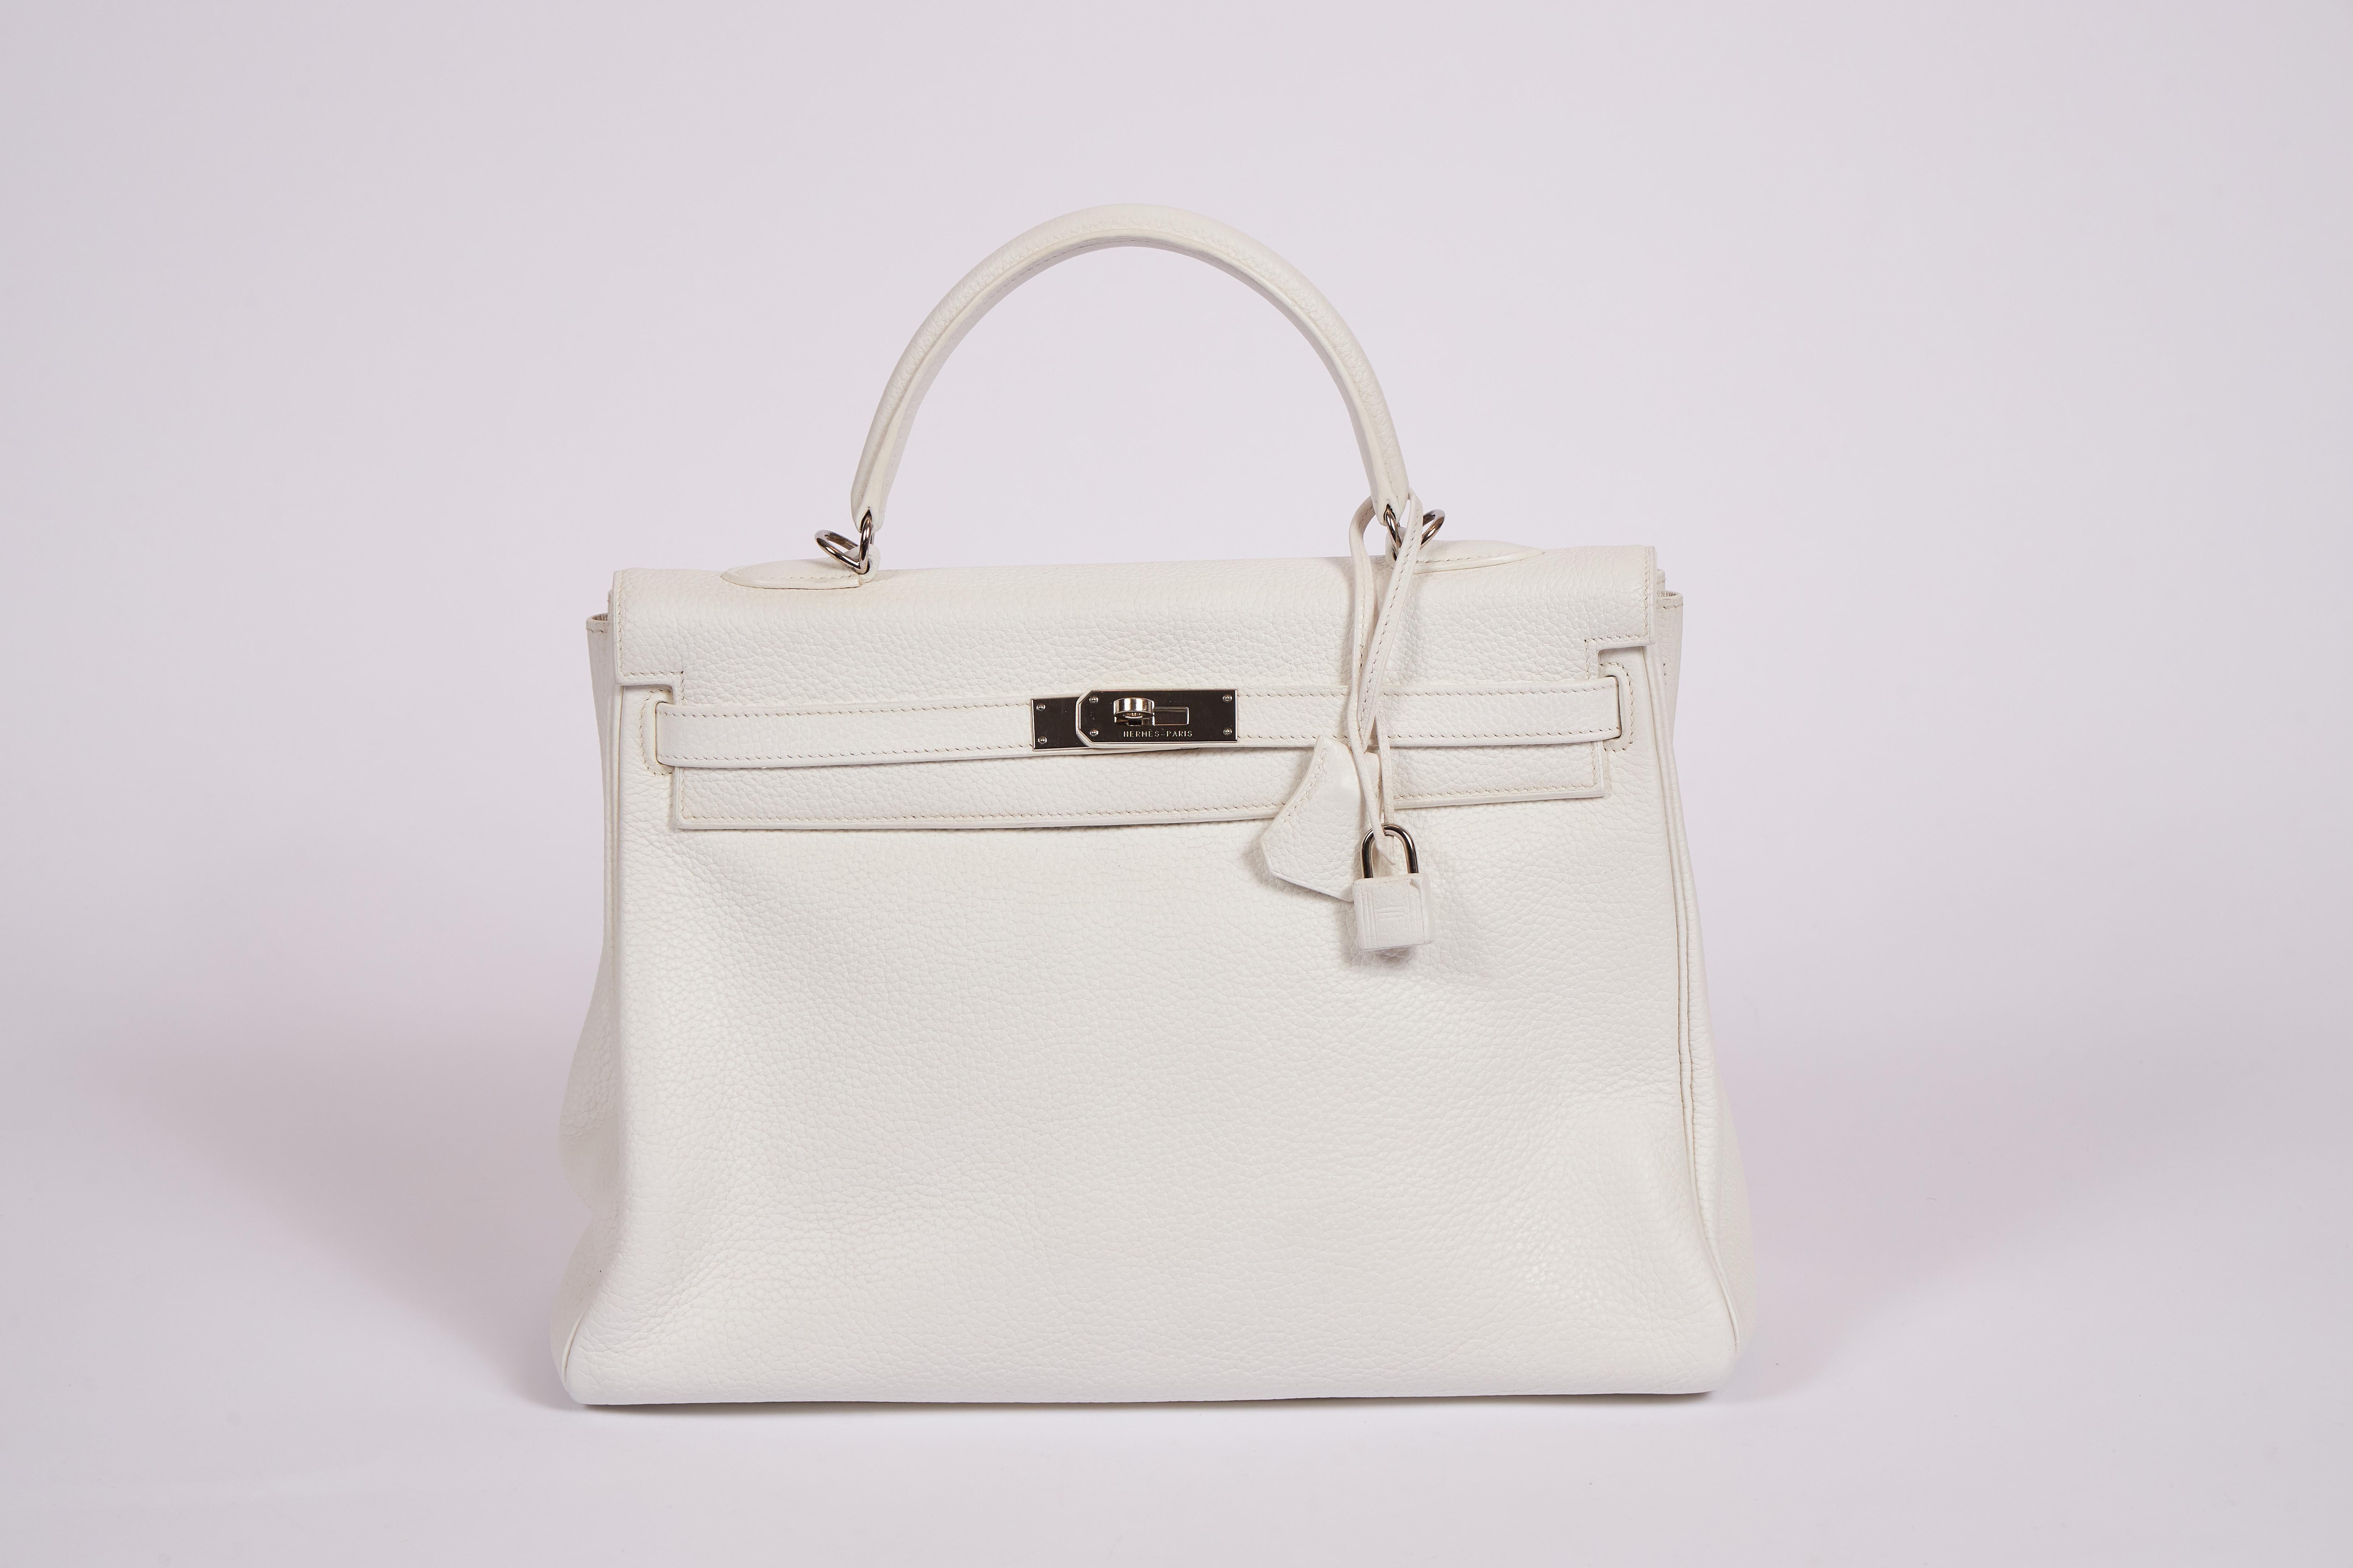 Hermes kelly bag 35 cm retourne in white taurillon clemence leather and palladium hardware. Detachable strap, 35